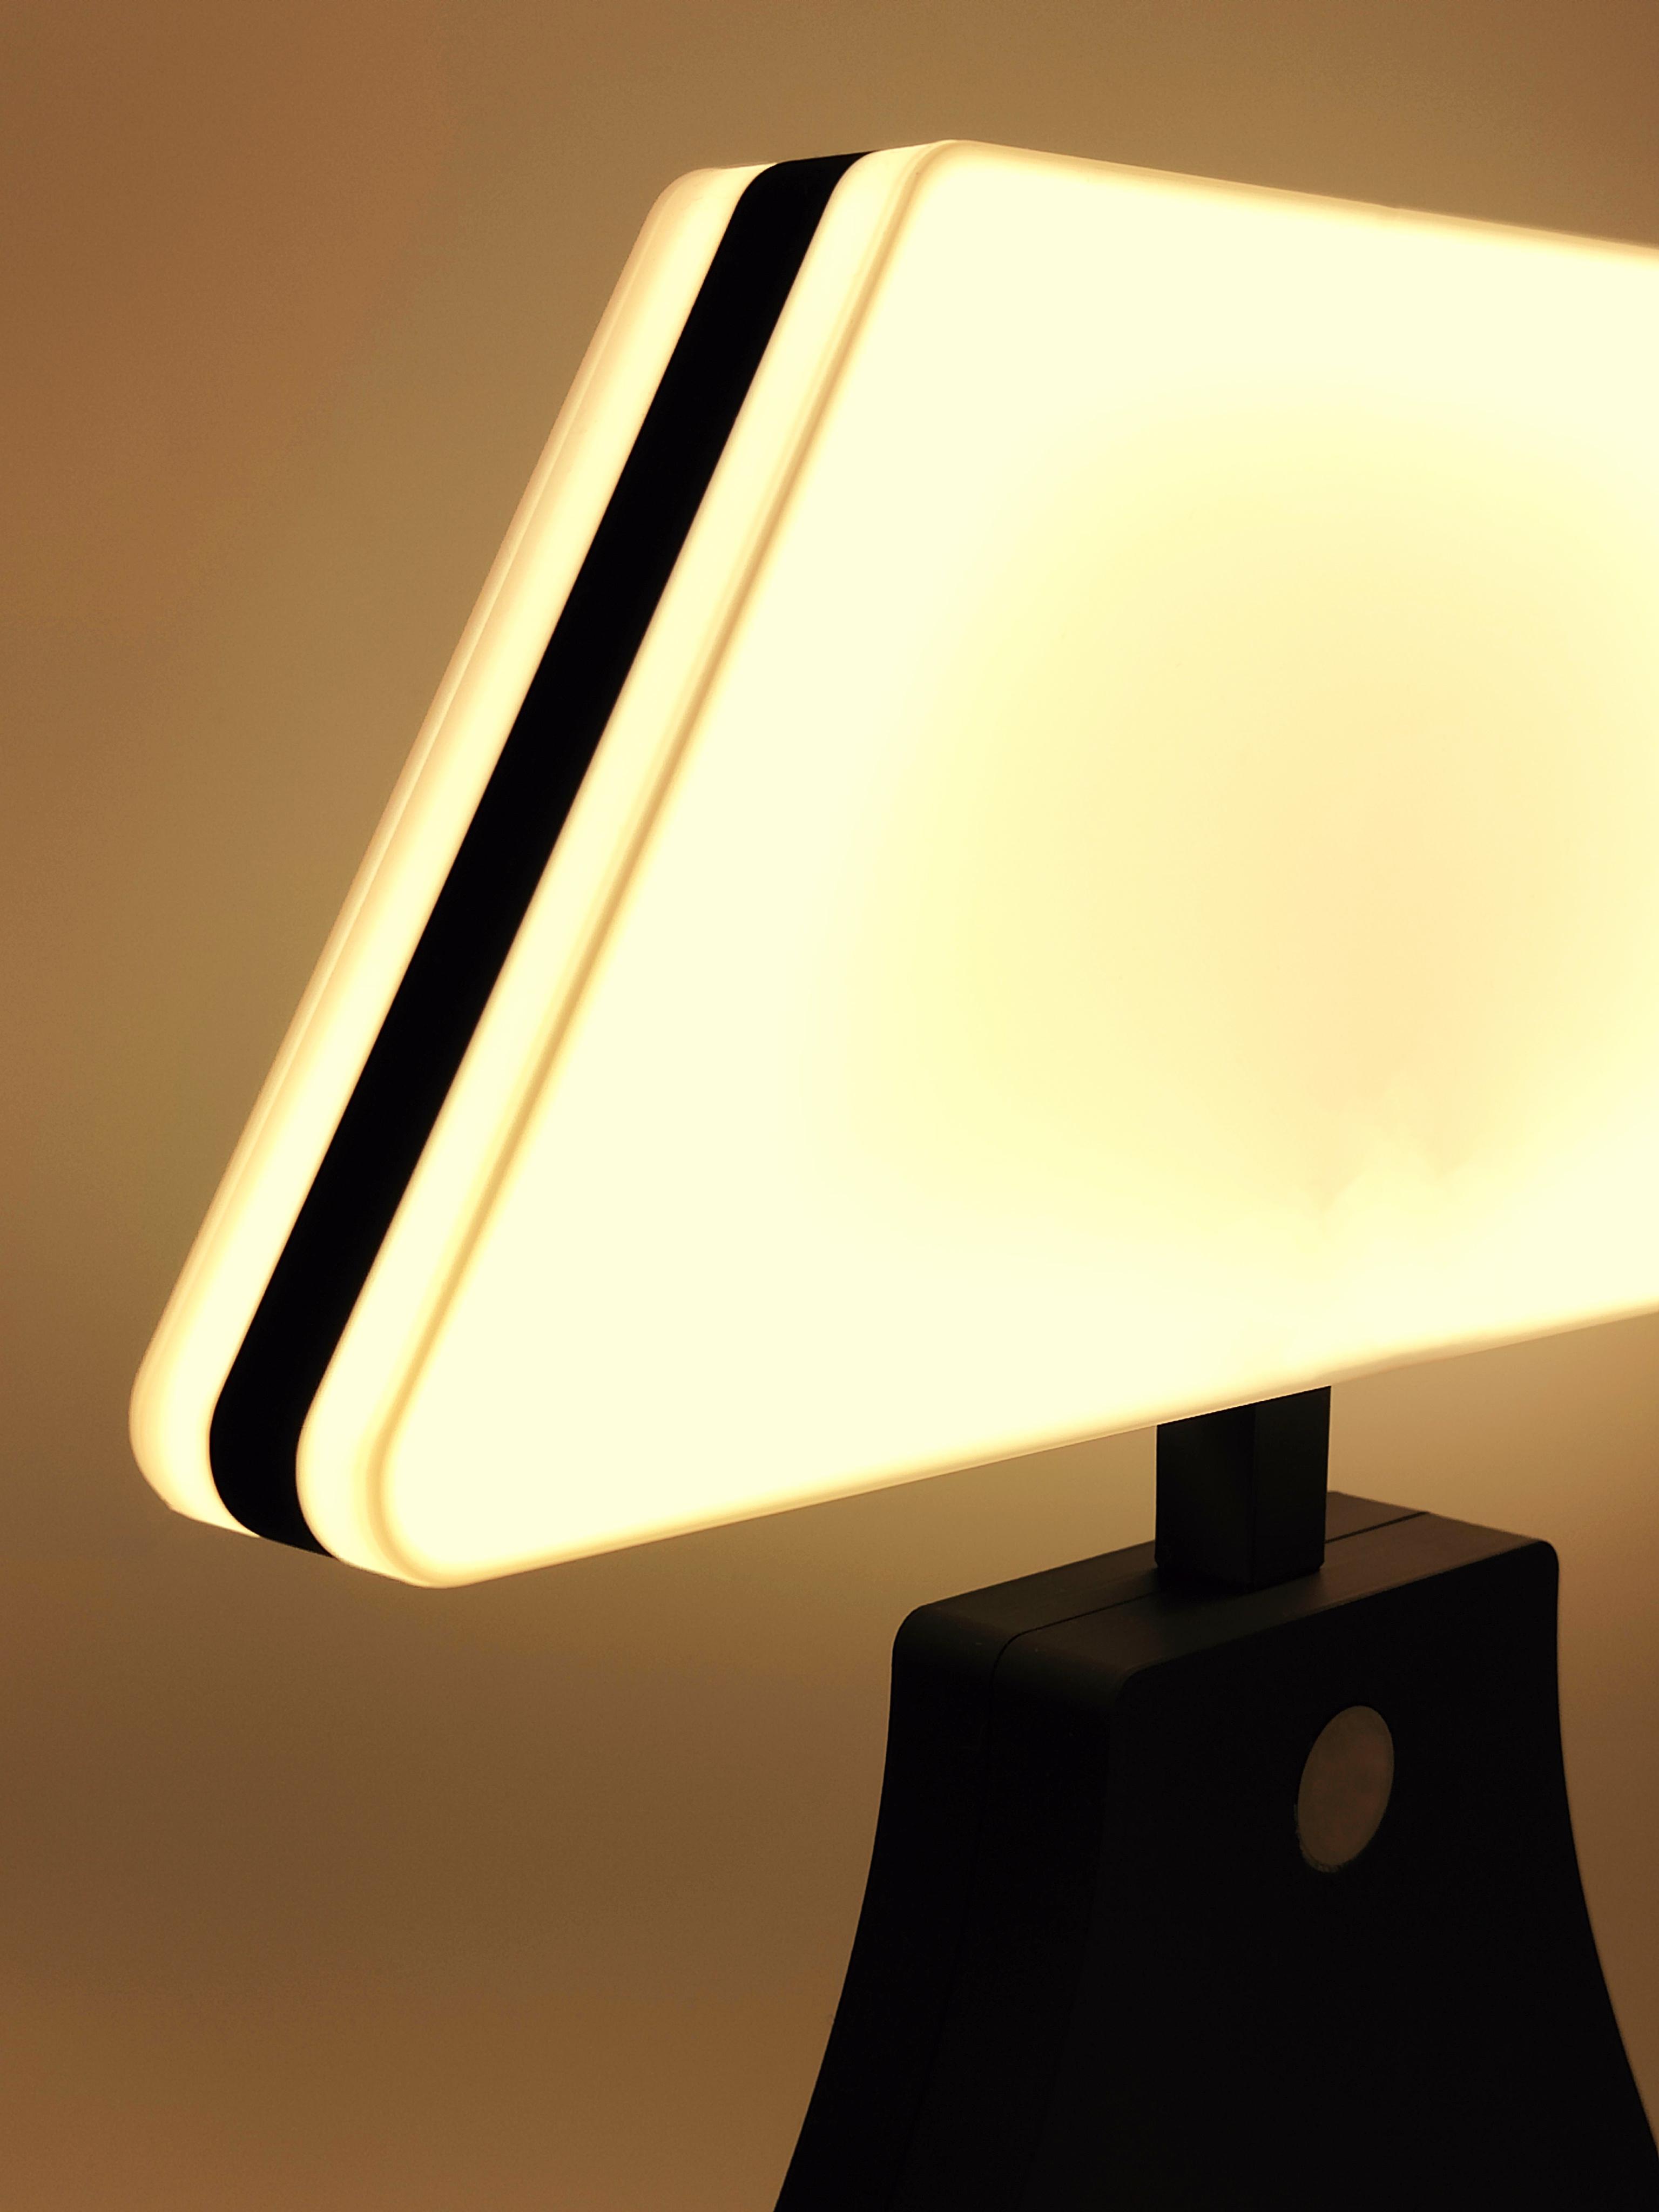 Bella - Led Lamp with interchangeable magnetic skins 3d model